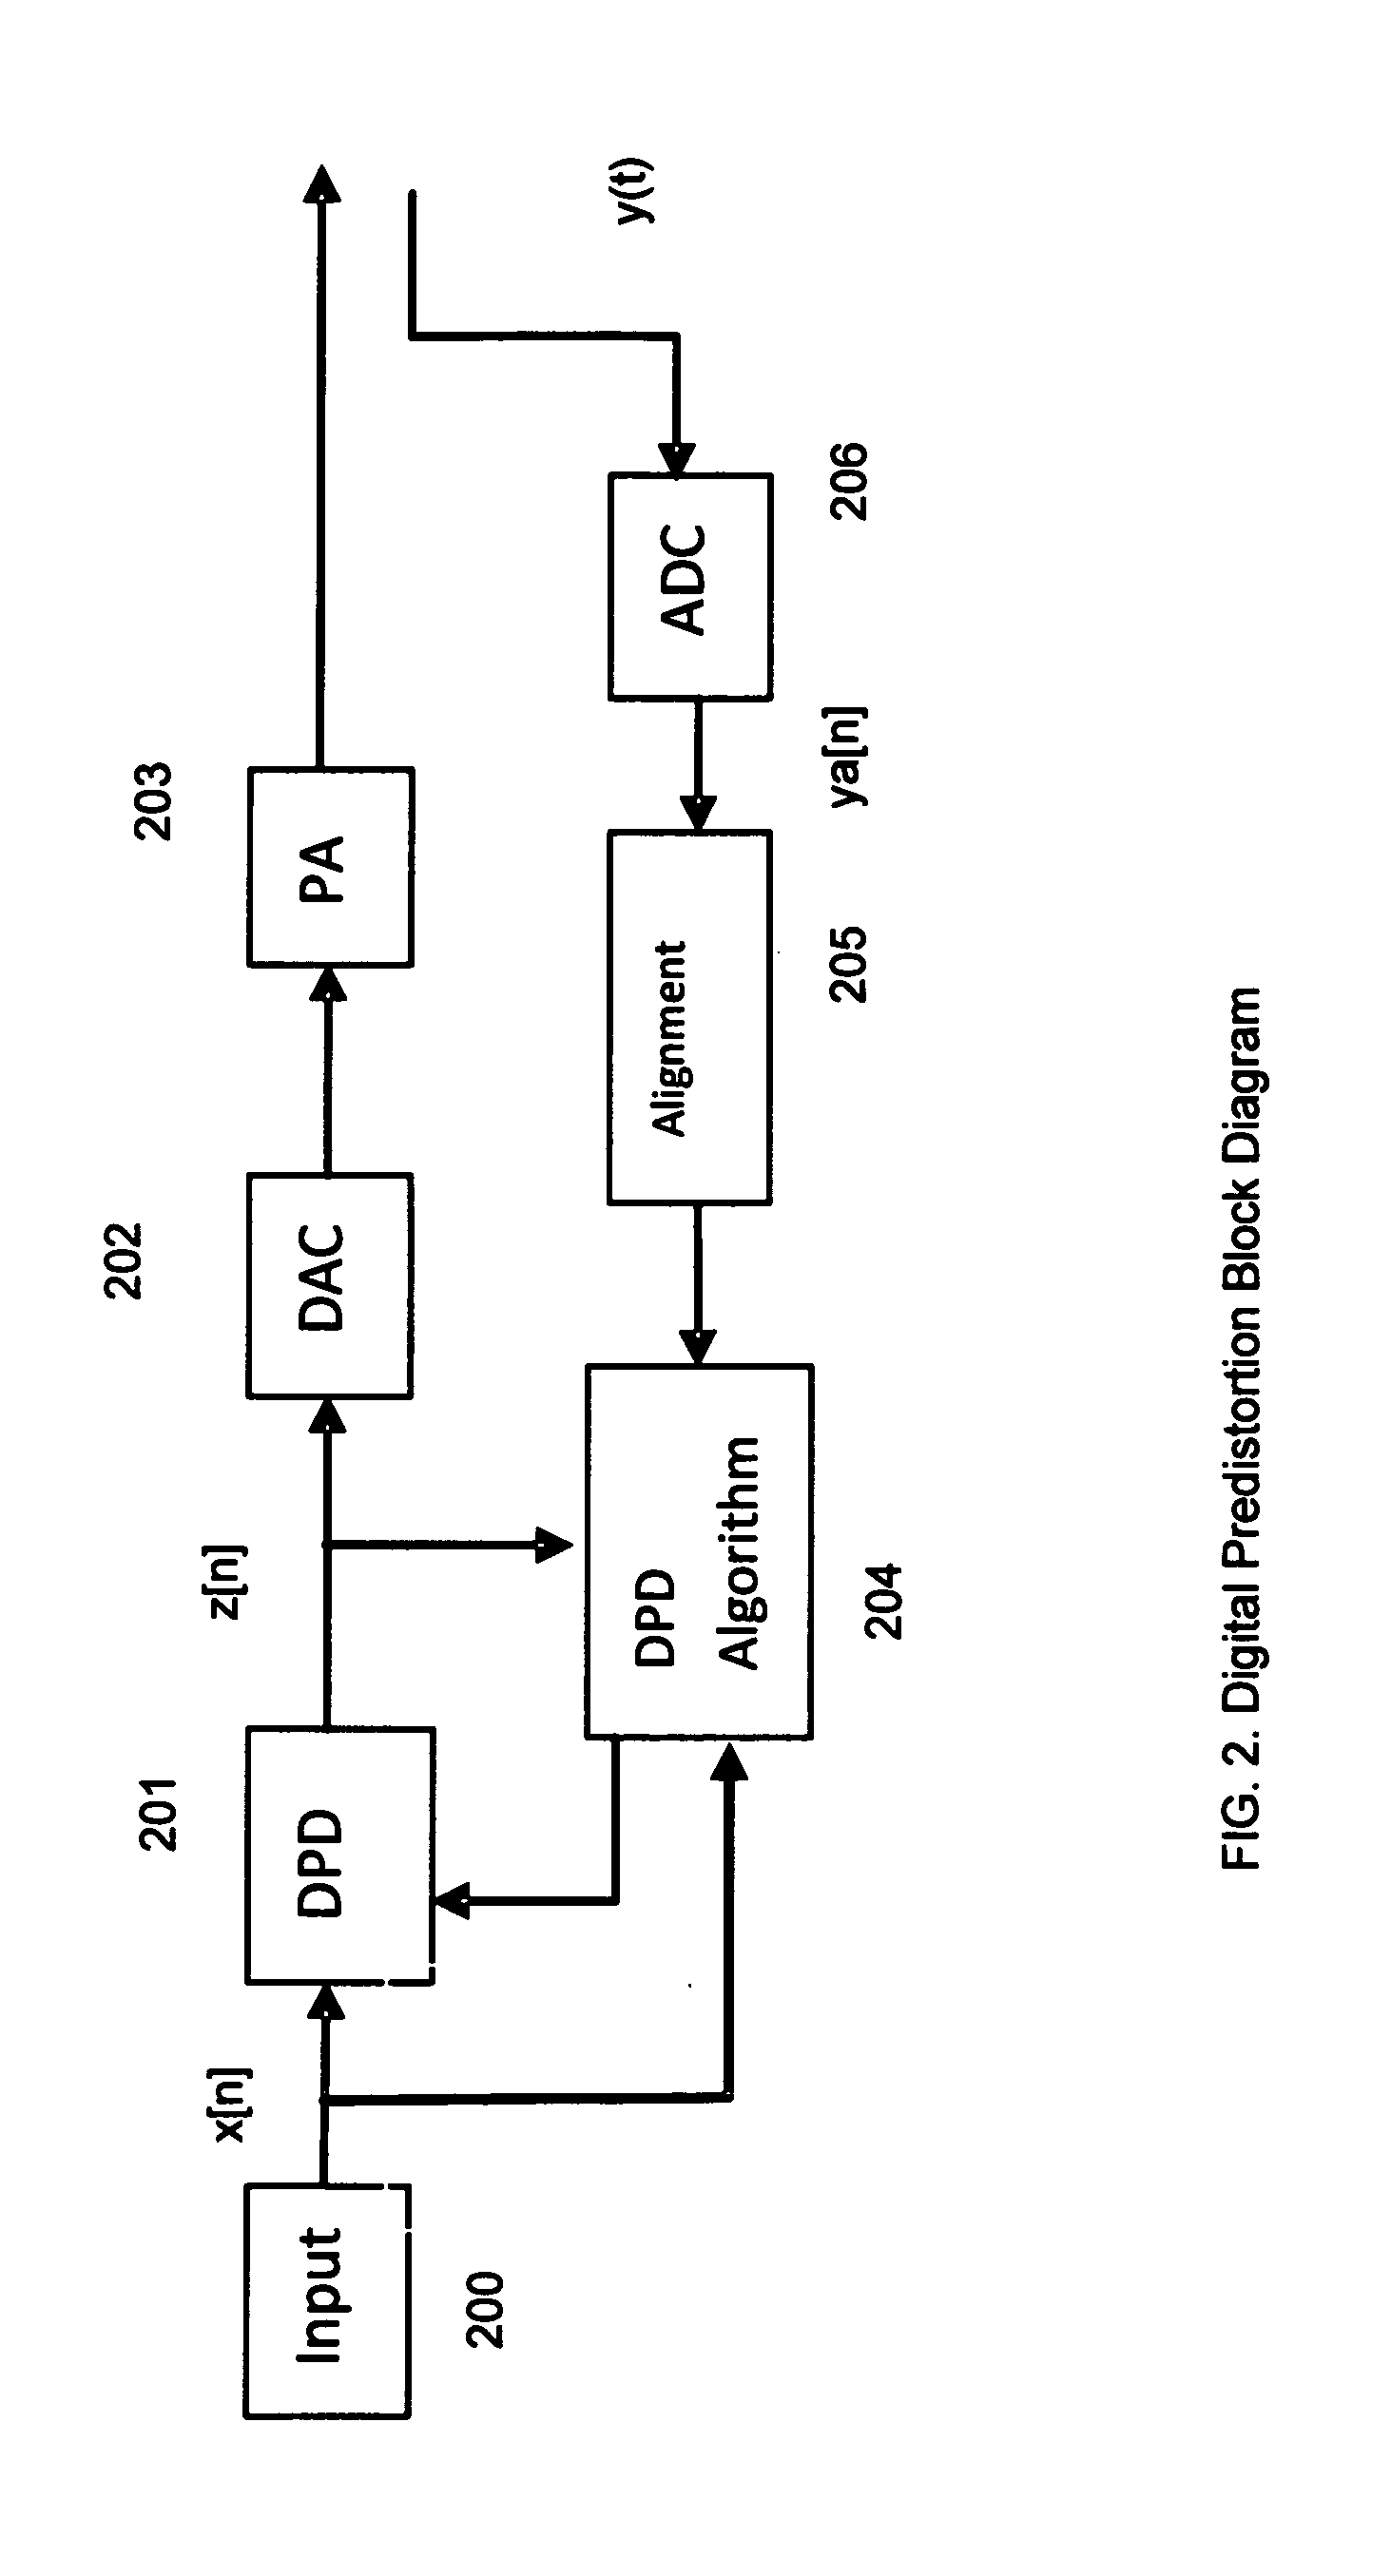 Multi-band wideband power amplifier digital predistorition system and method